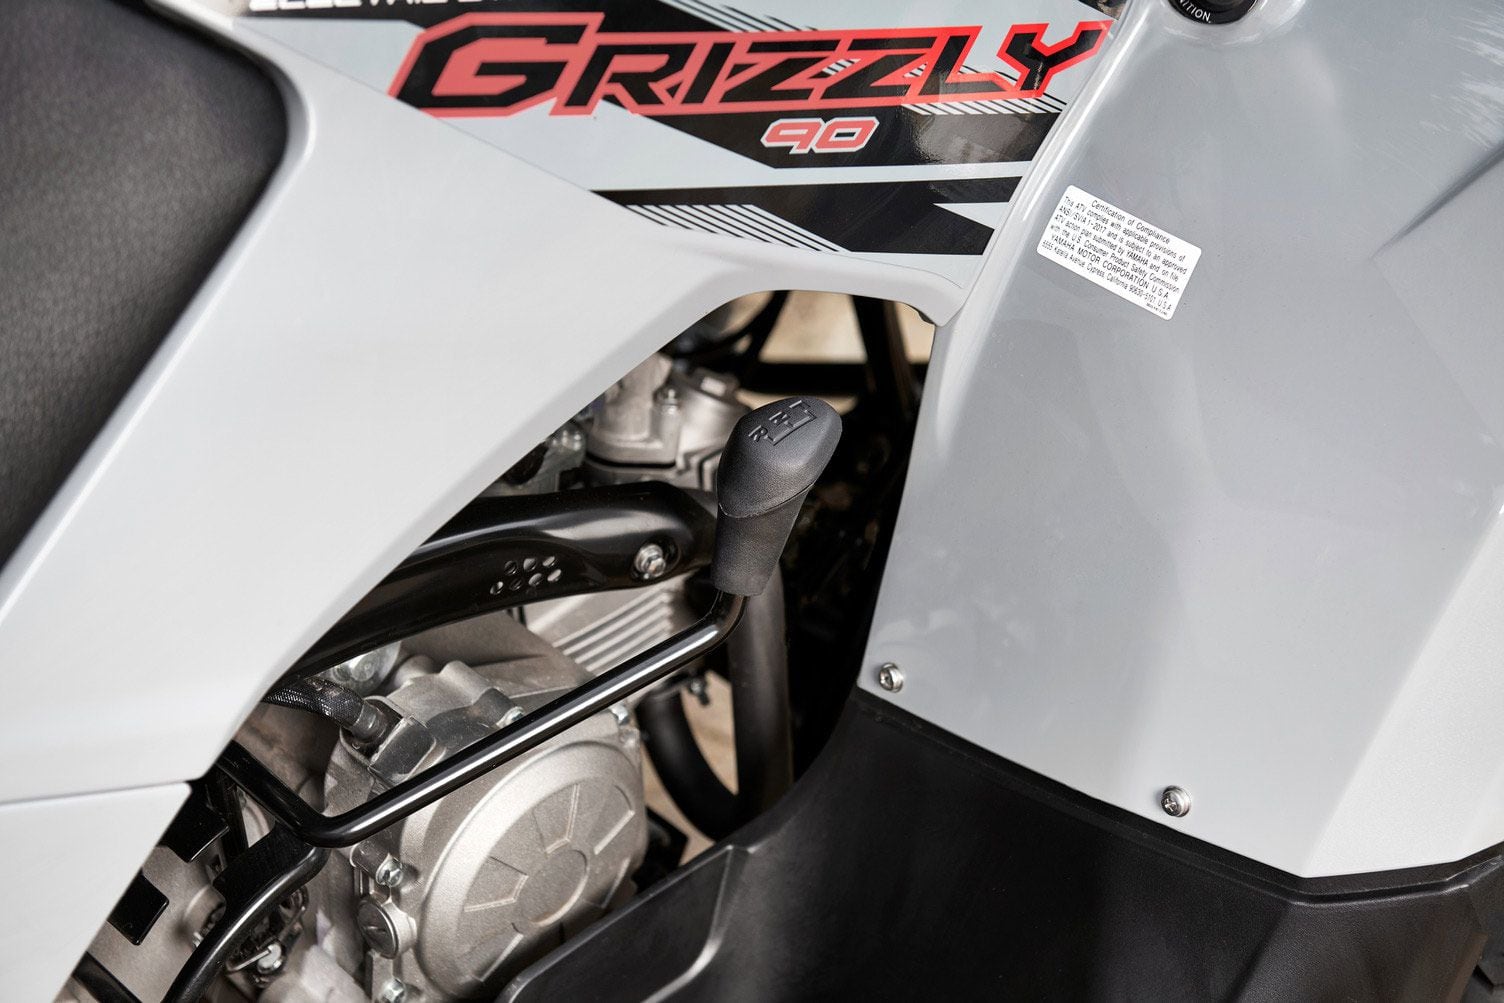 The Grizzly 90 uses a CVT transmission that includes forward, neutral, and reverse gears.